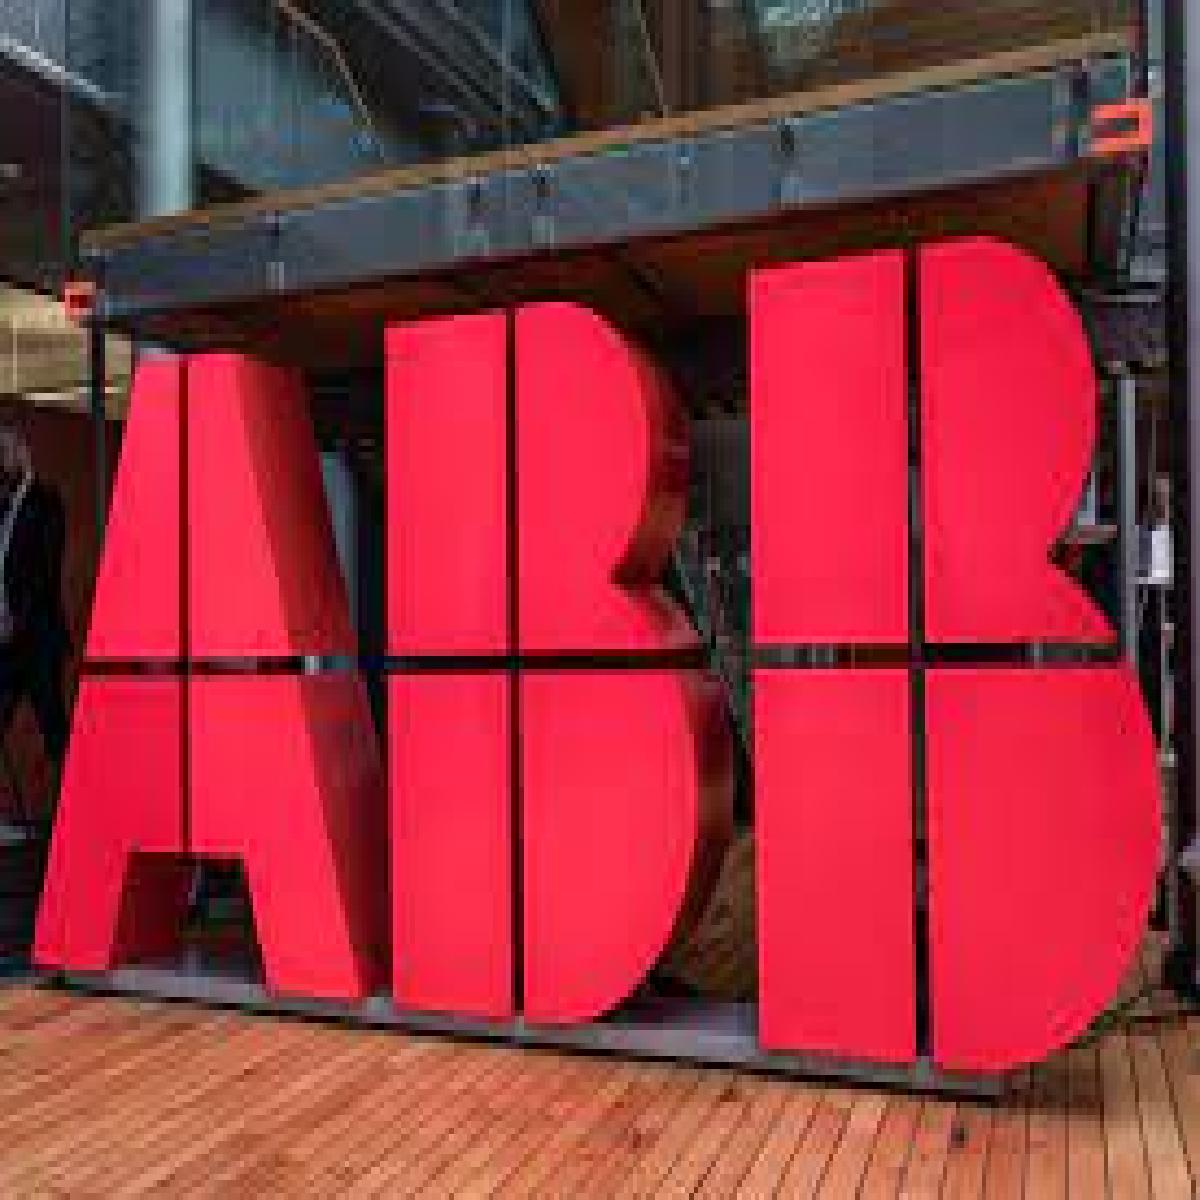 ABB Completes Accelleron Spin-Off